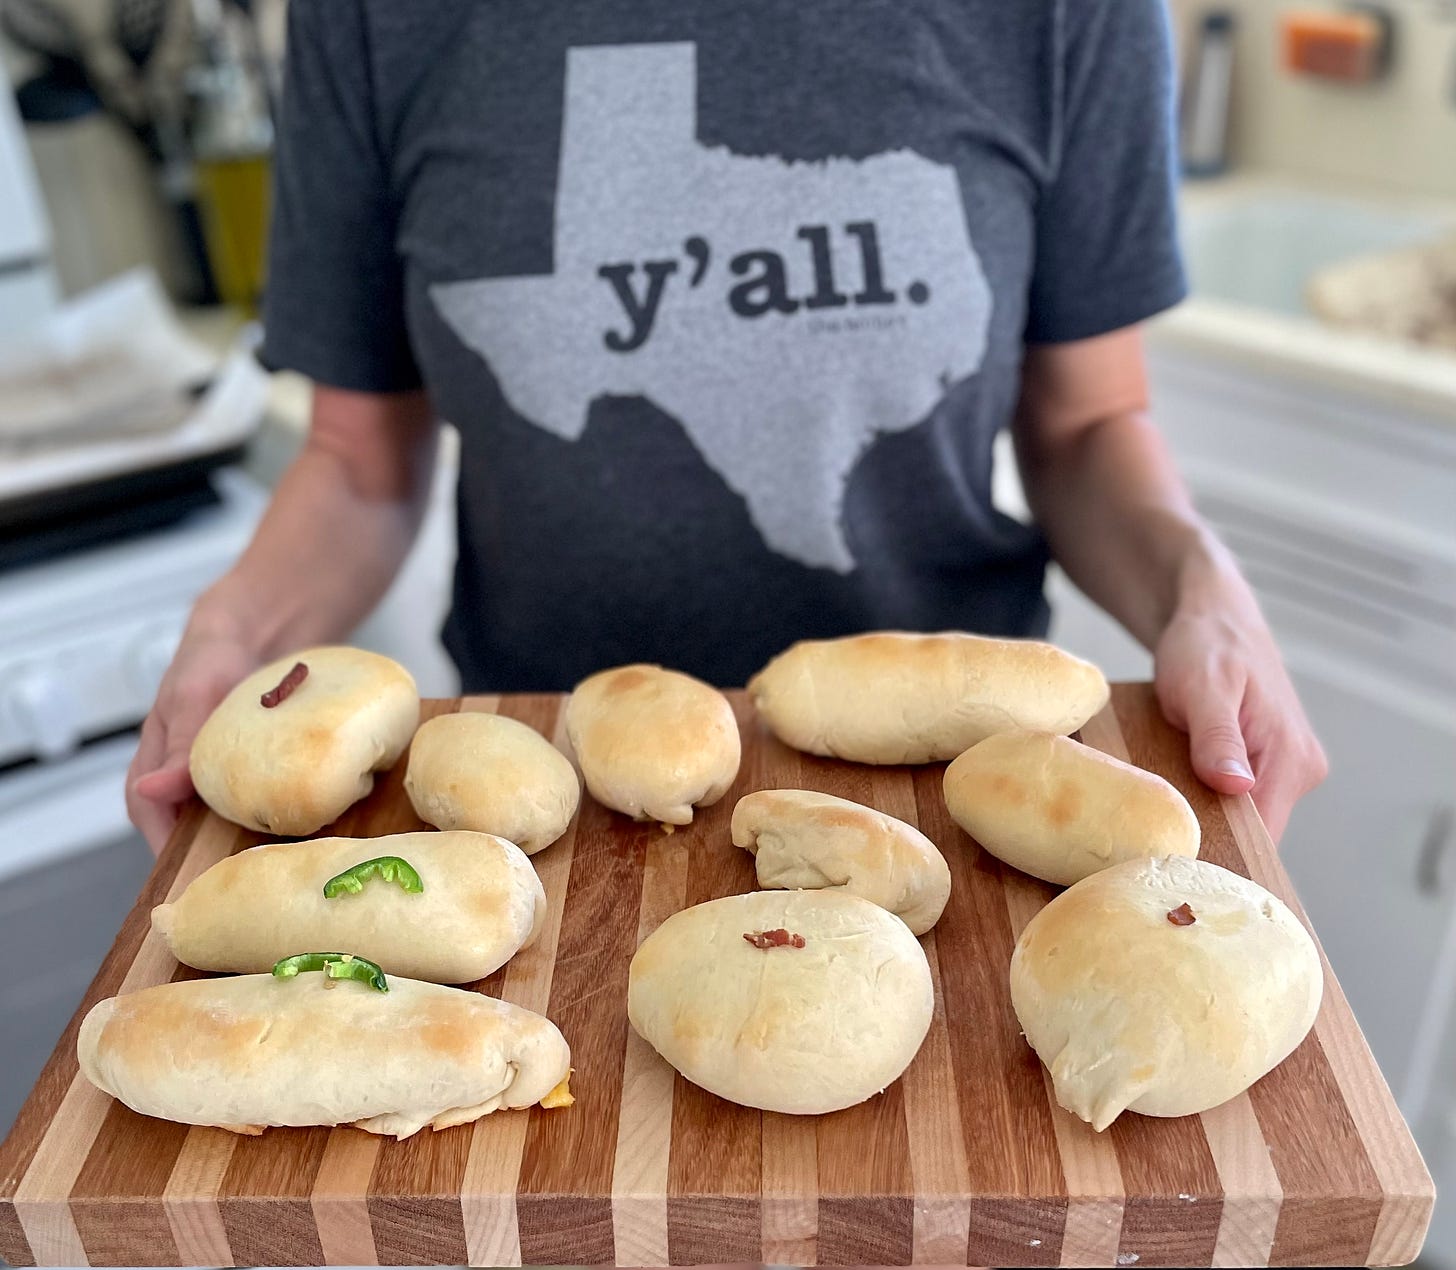 Kolaches out of the oven with y'all shirt